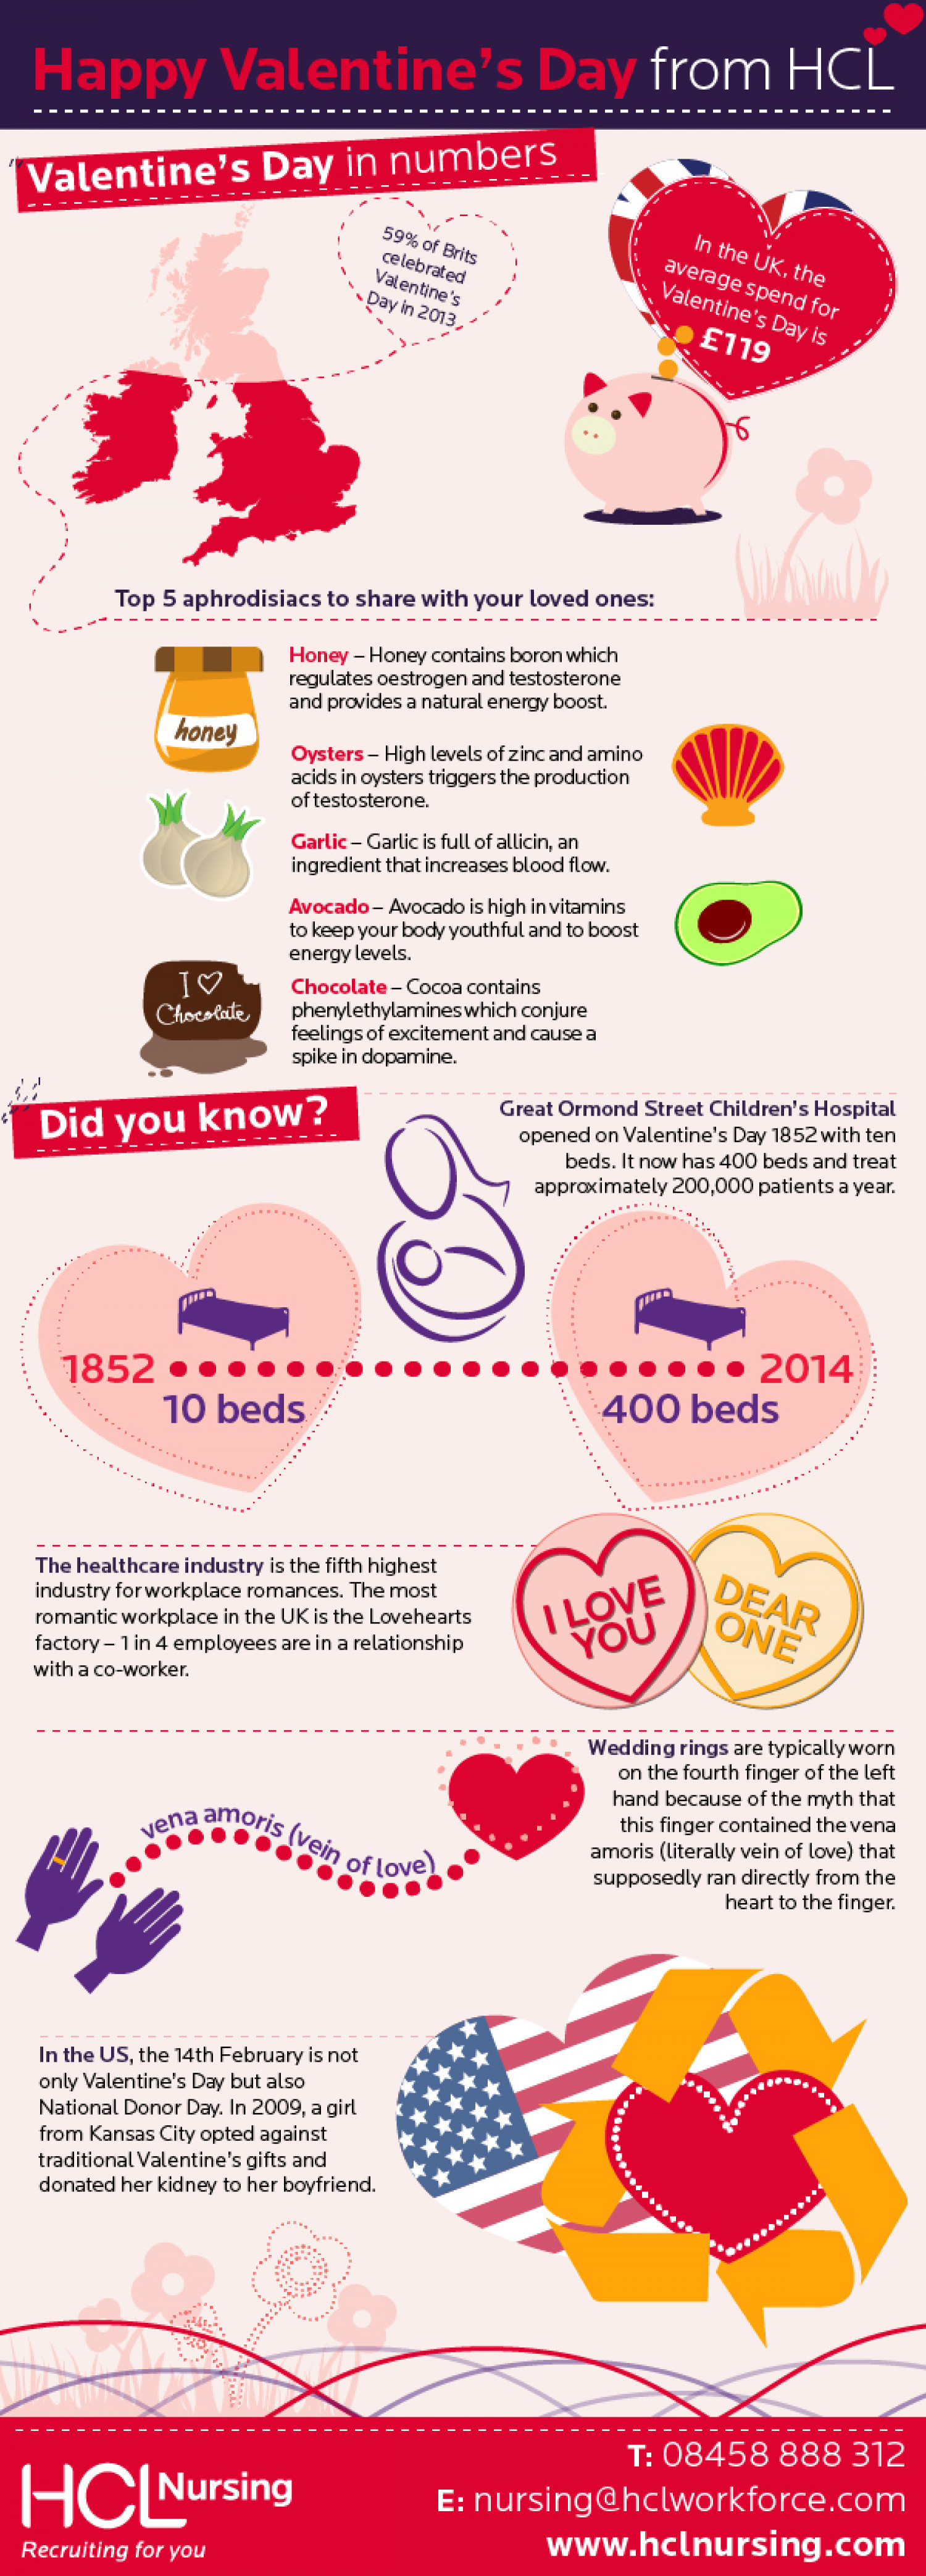 Happy Valentine's Days from HCL Infographic